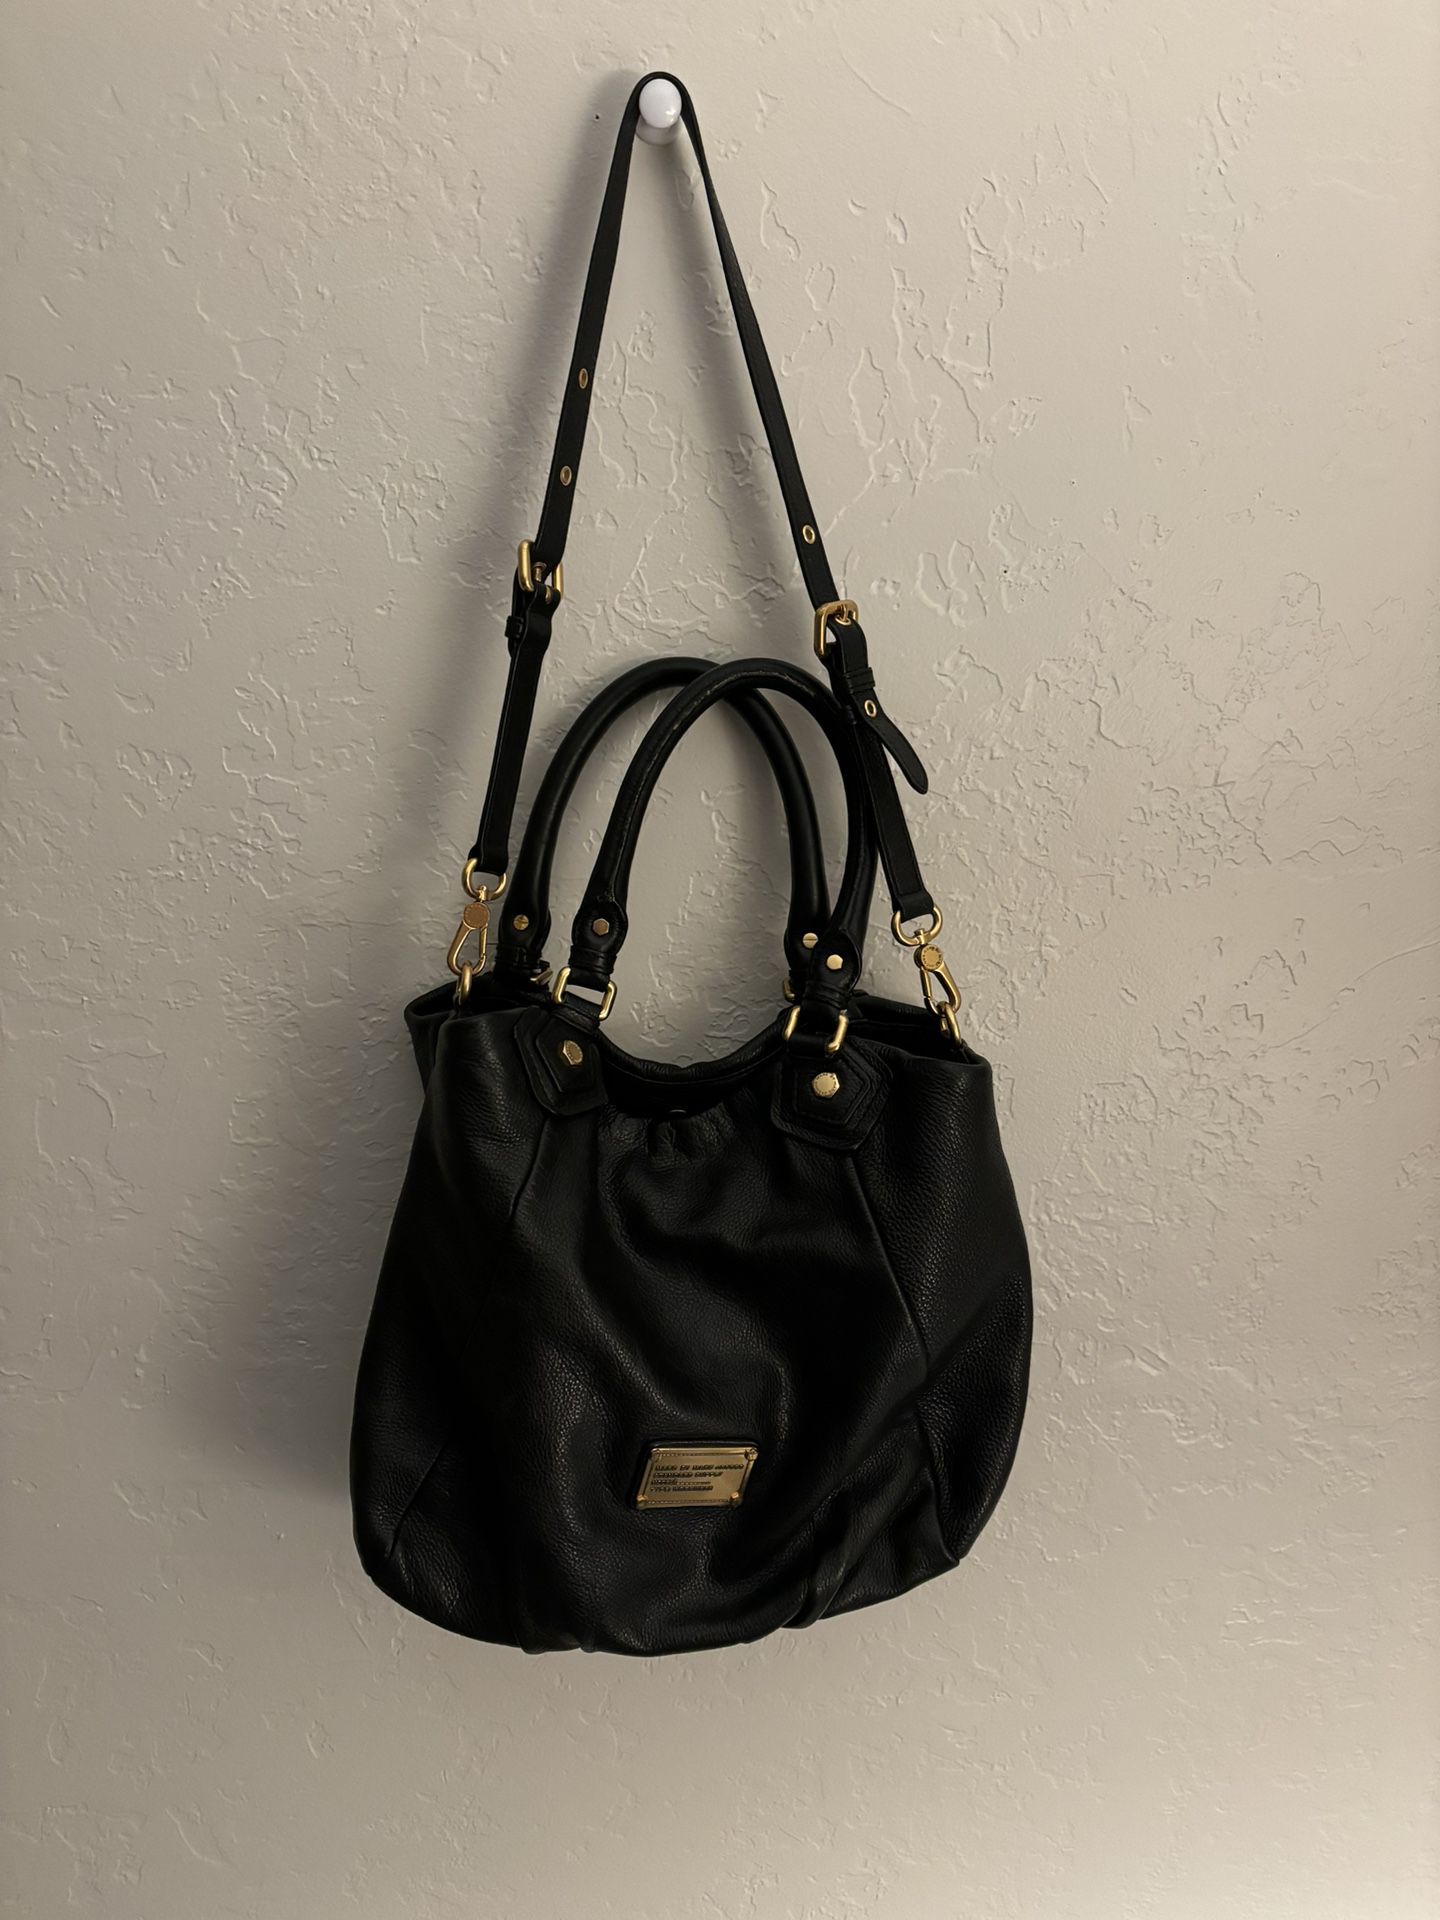 Marc by Marc Jacobs tote/messenger Bag